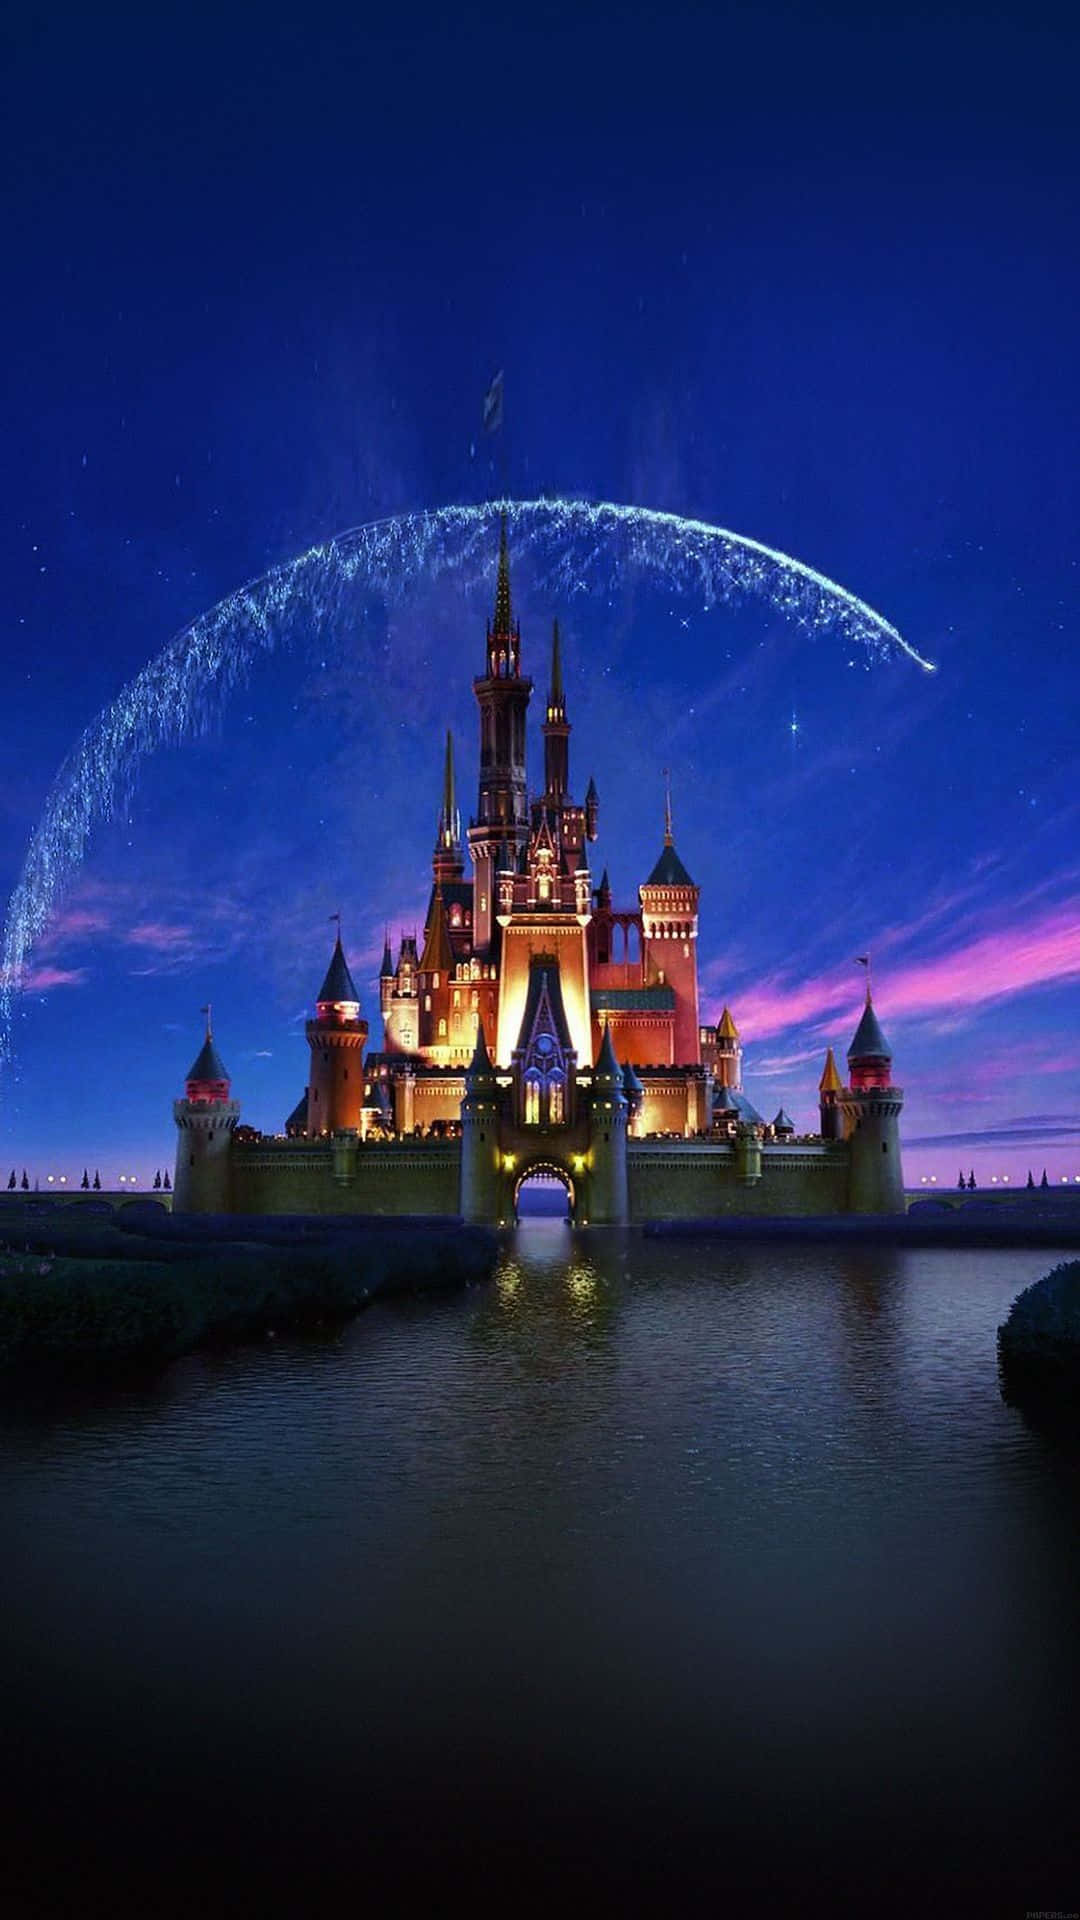 Experience the Splendor of Disney World with an iPhone Wallpaper